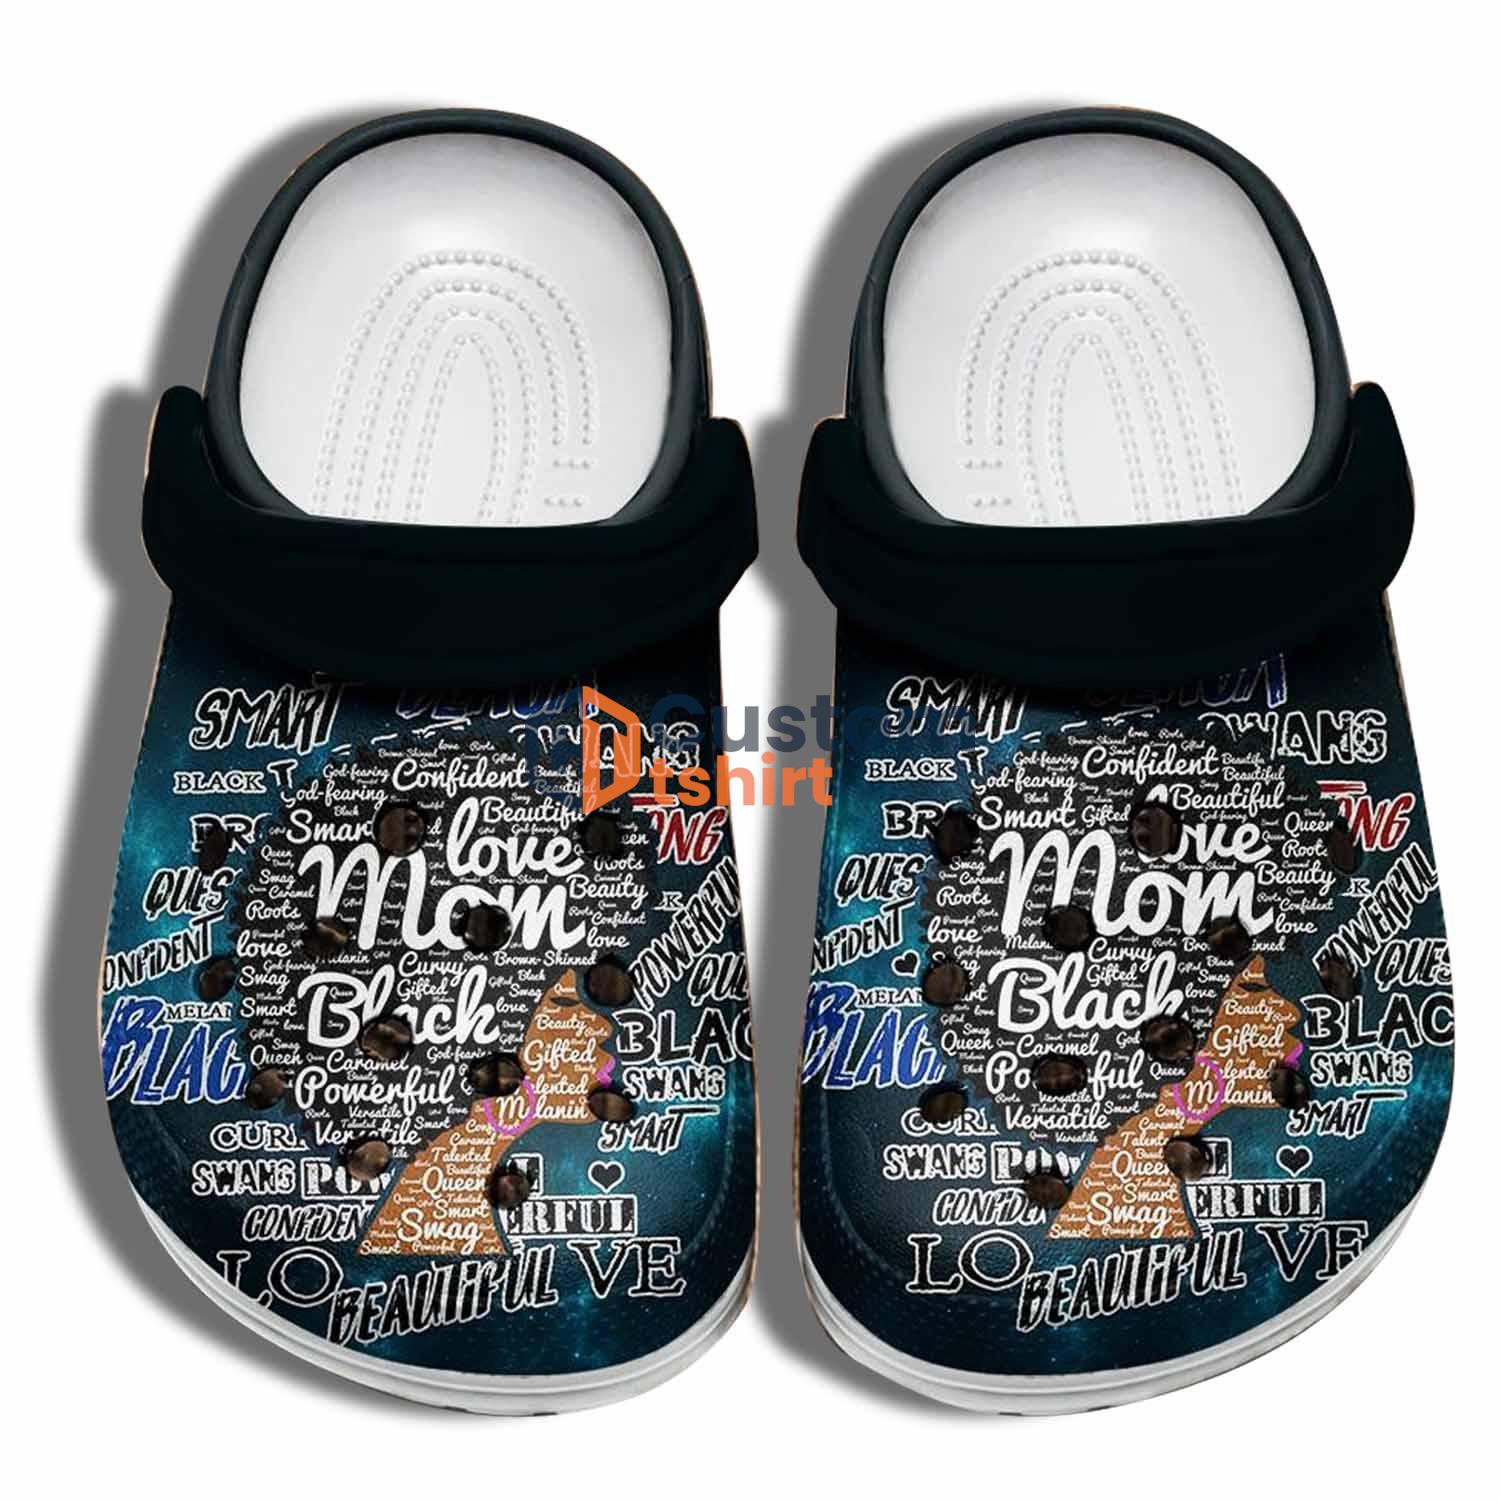 Love Mom Black Clog Shoes For Mothers Day 2022 - Beautiful Hair Black Women Clog Shoes Gifts For Wife Product Photo 1 Product photo 1